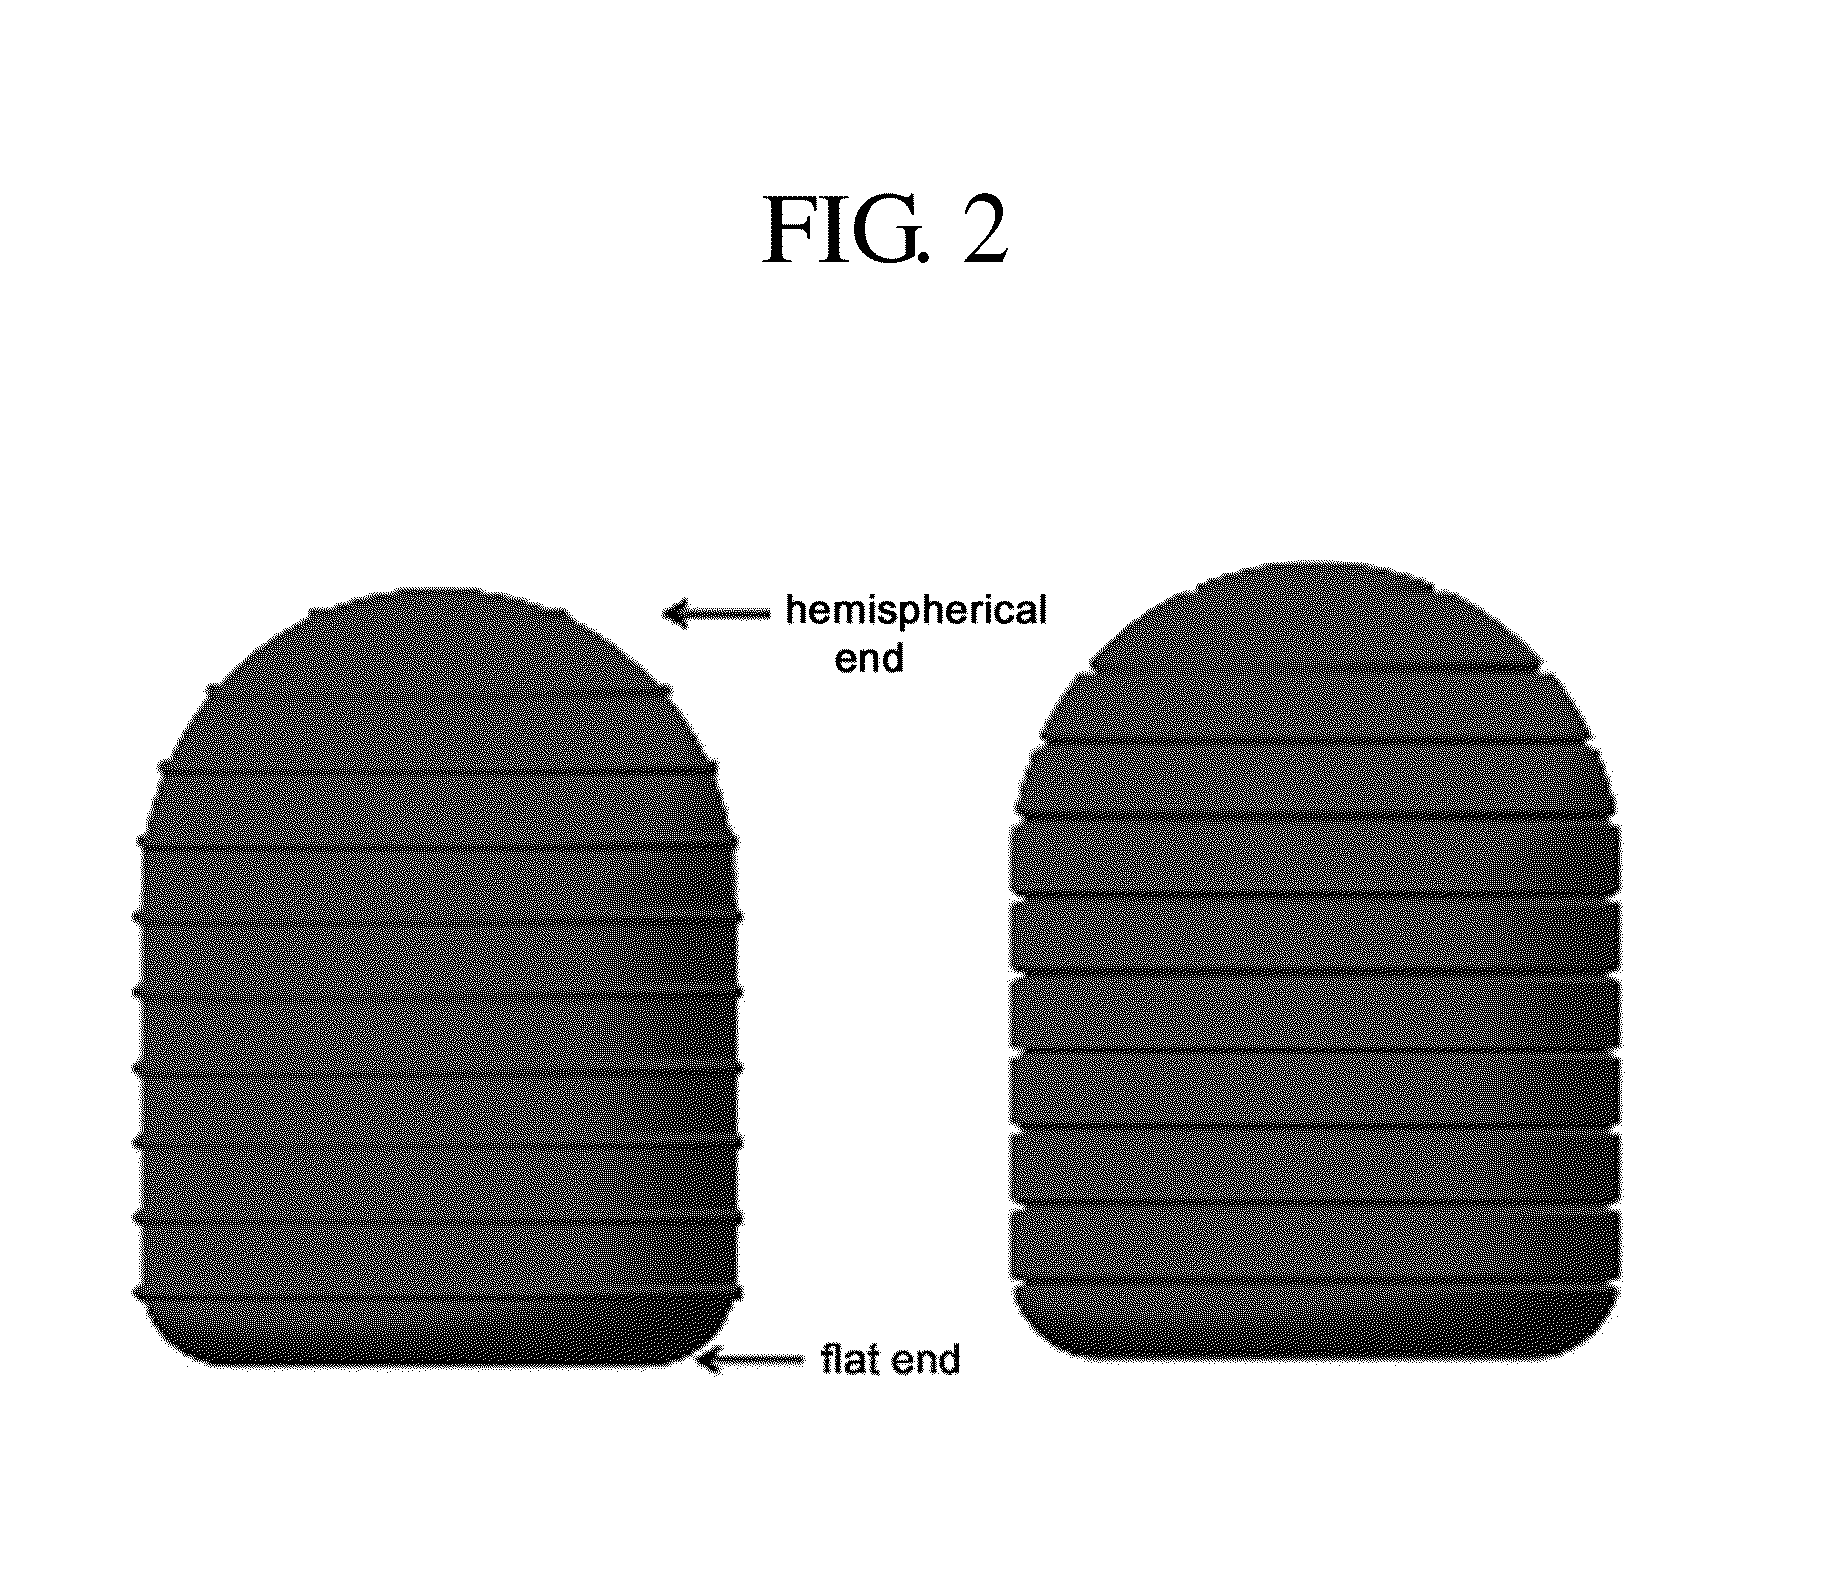 Composite formulation comprising a tablet encapsulated in a hard capsule